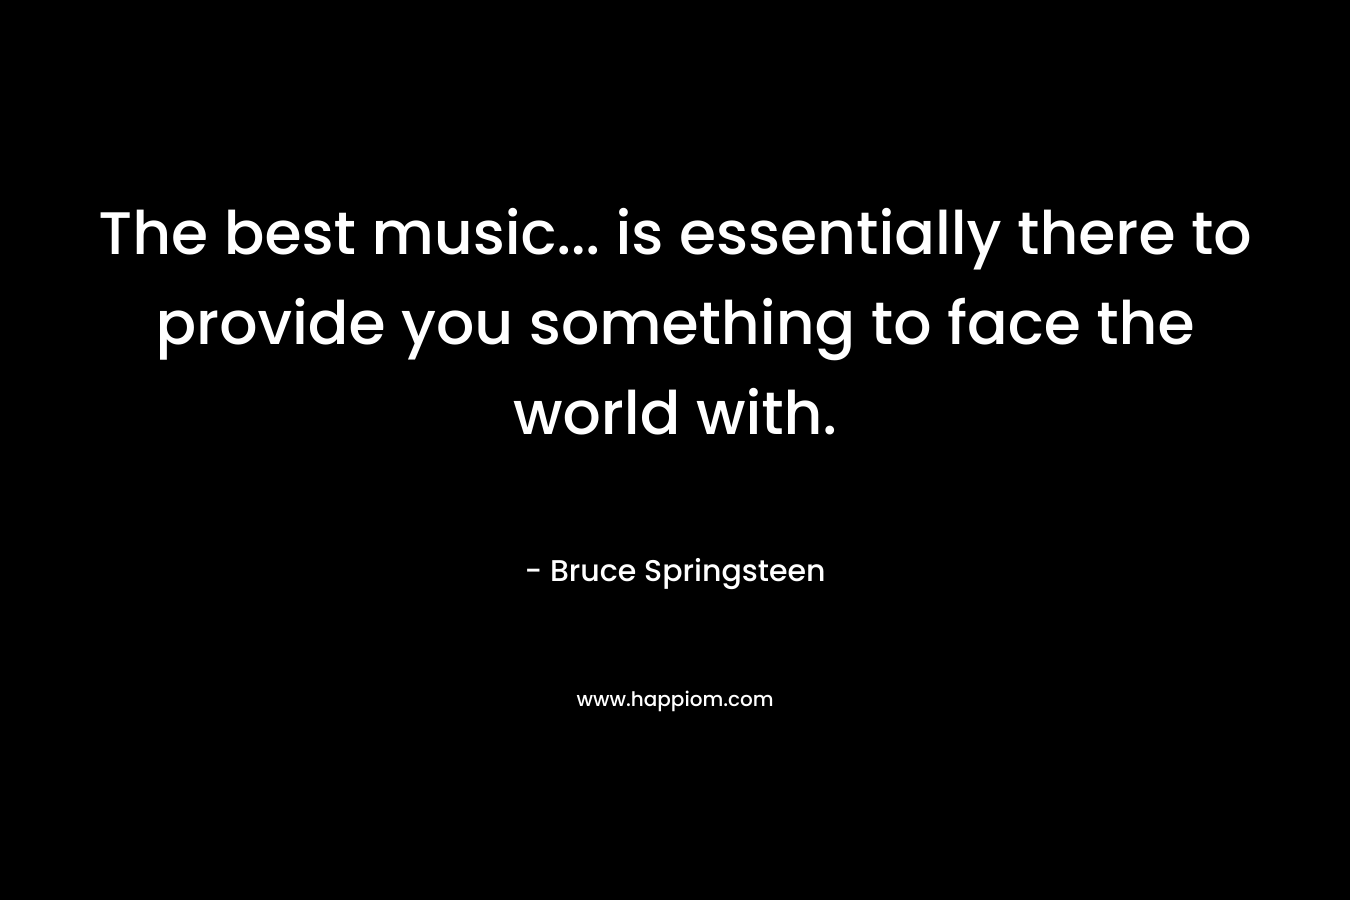 The best music... is essentially there to provide you something to face the world with.